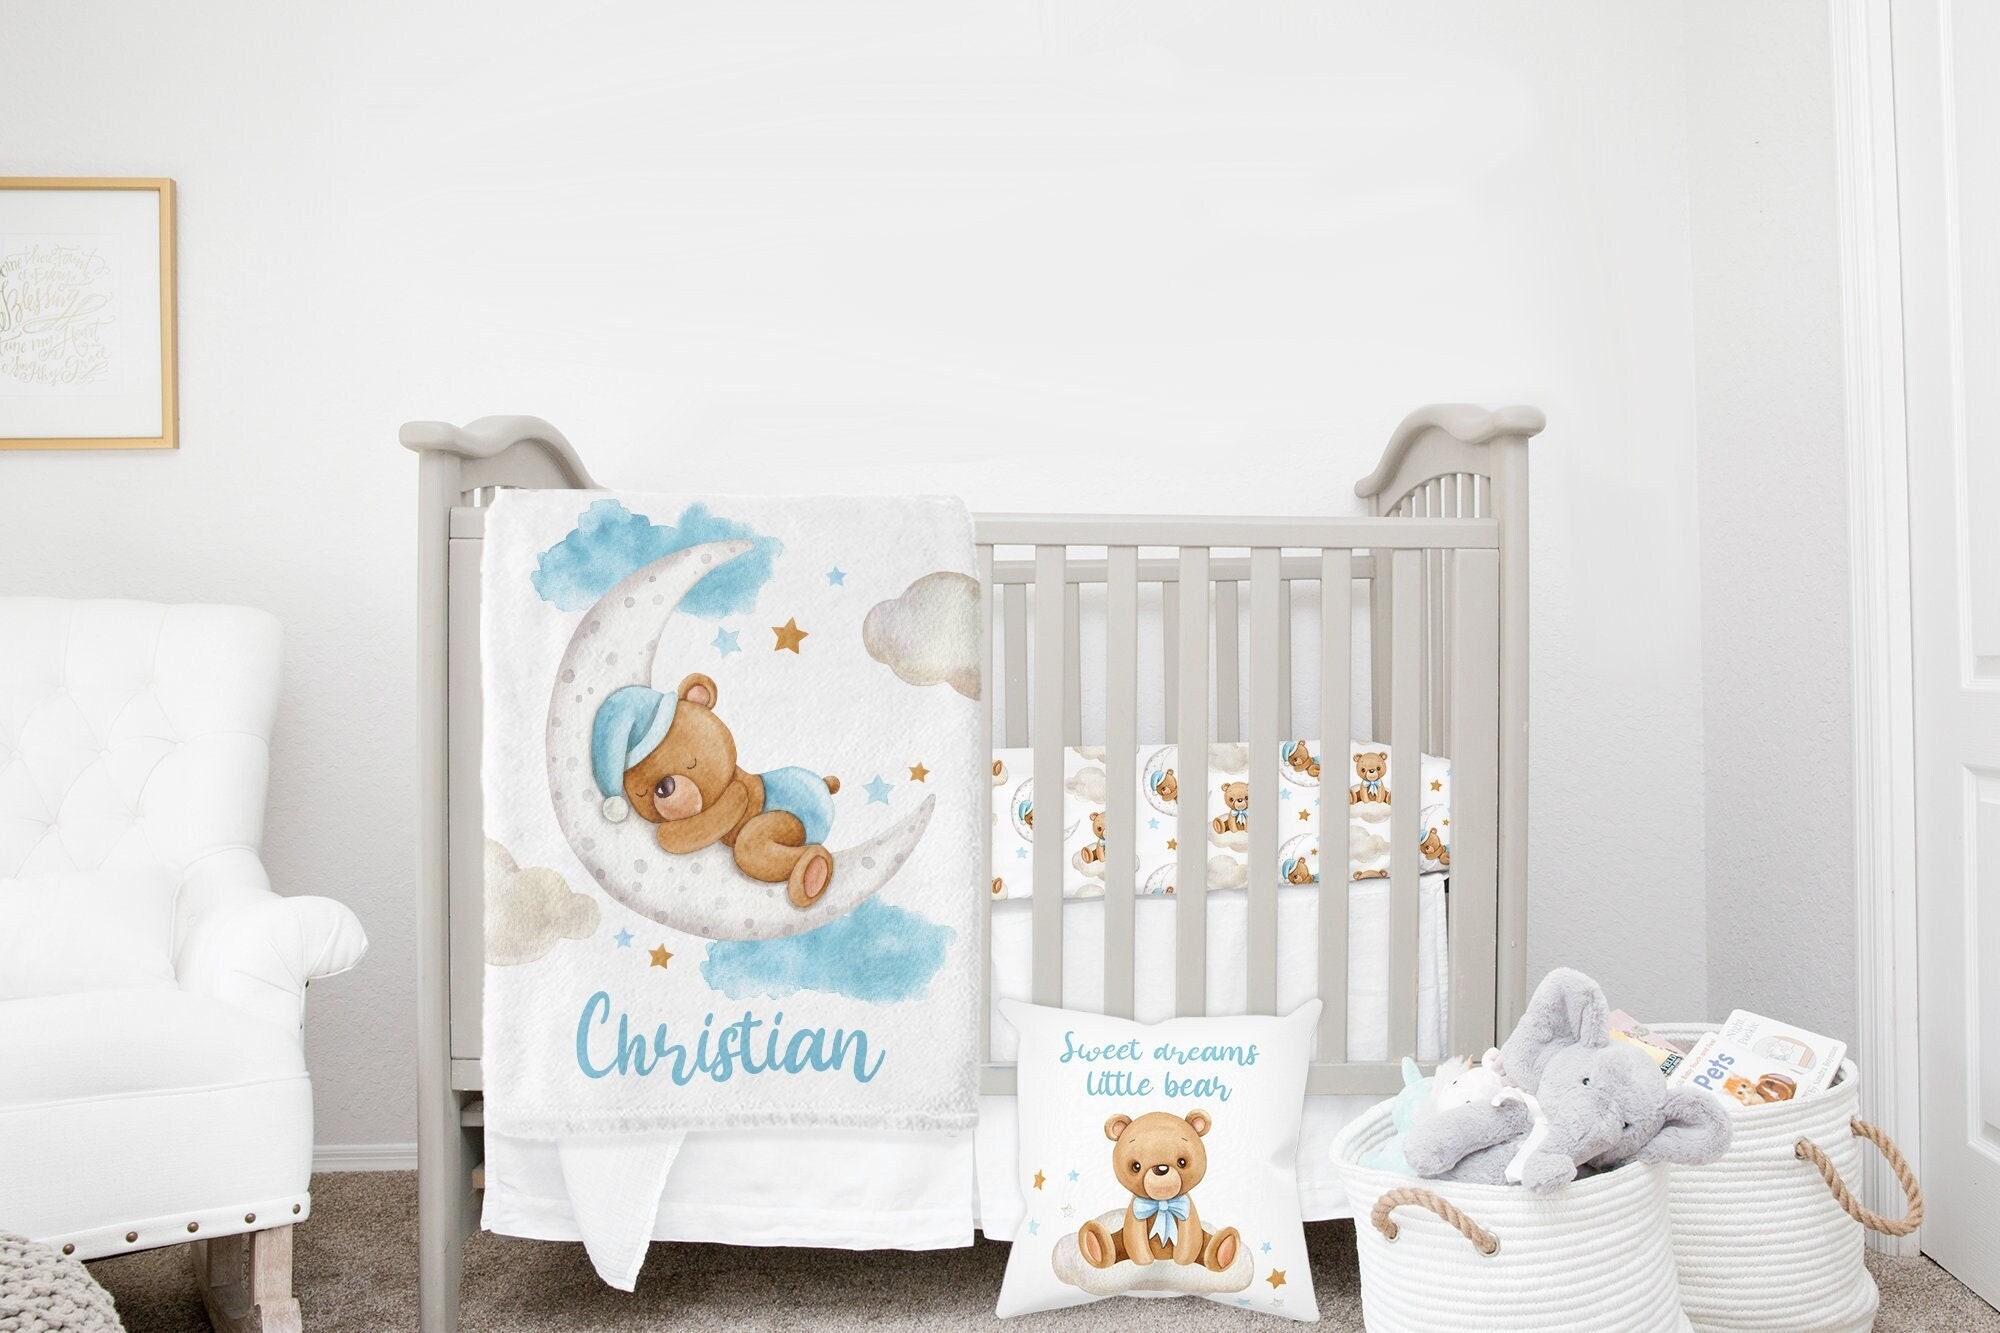 Give Baby Sweet Dreams: Why Teddy Bear Crib Mobiles Make the Perfect Gift